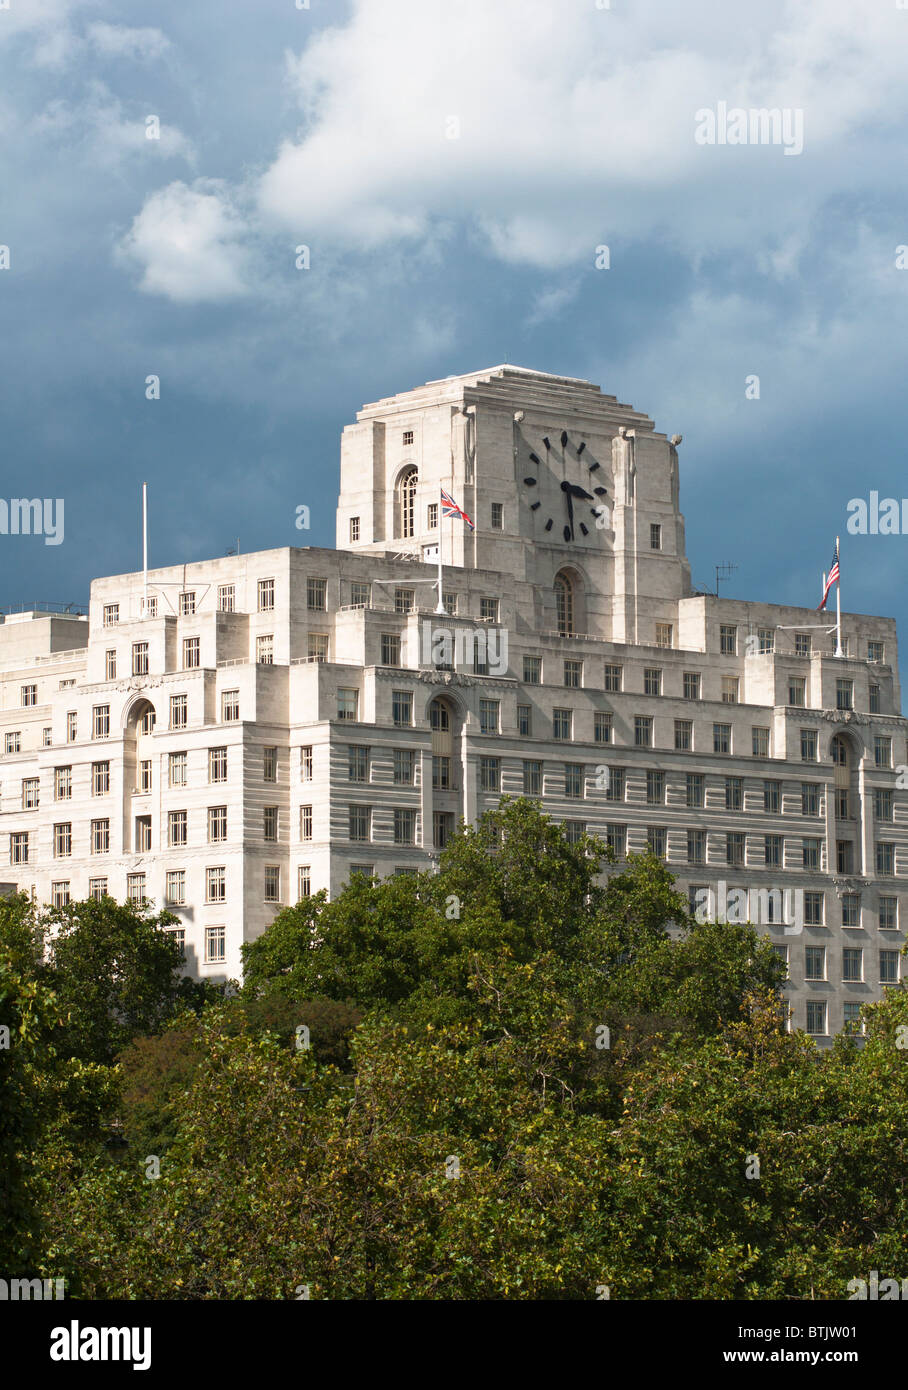 Art Deco Shell Mex Building on the banks of the river Thames, London, UK. Stock Photo